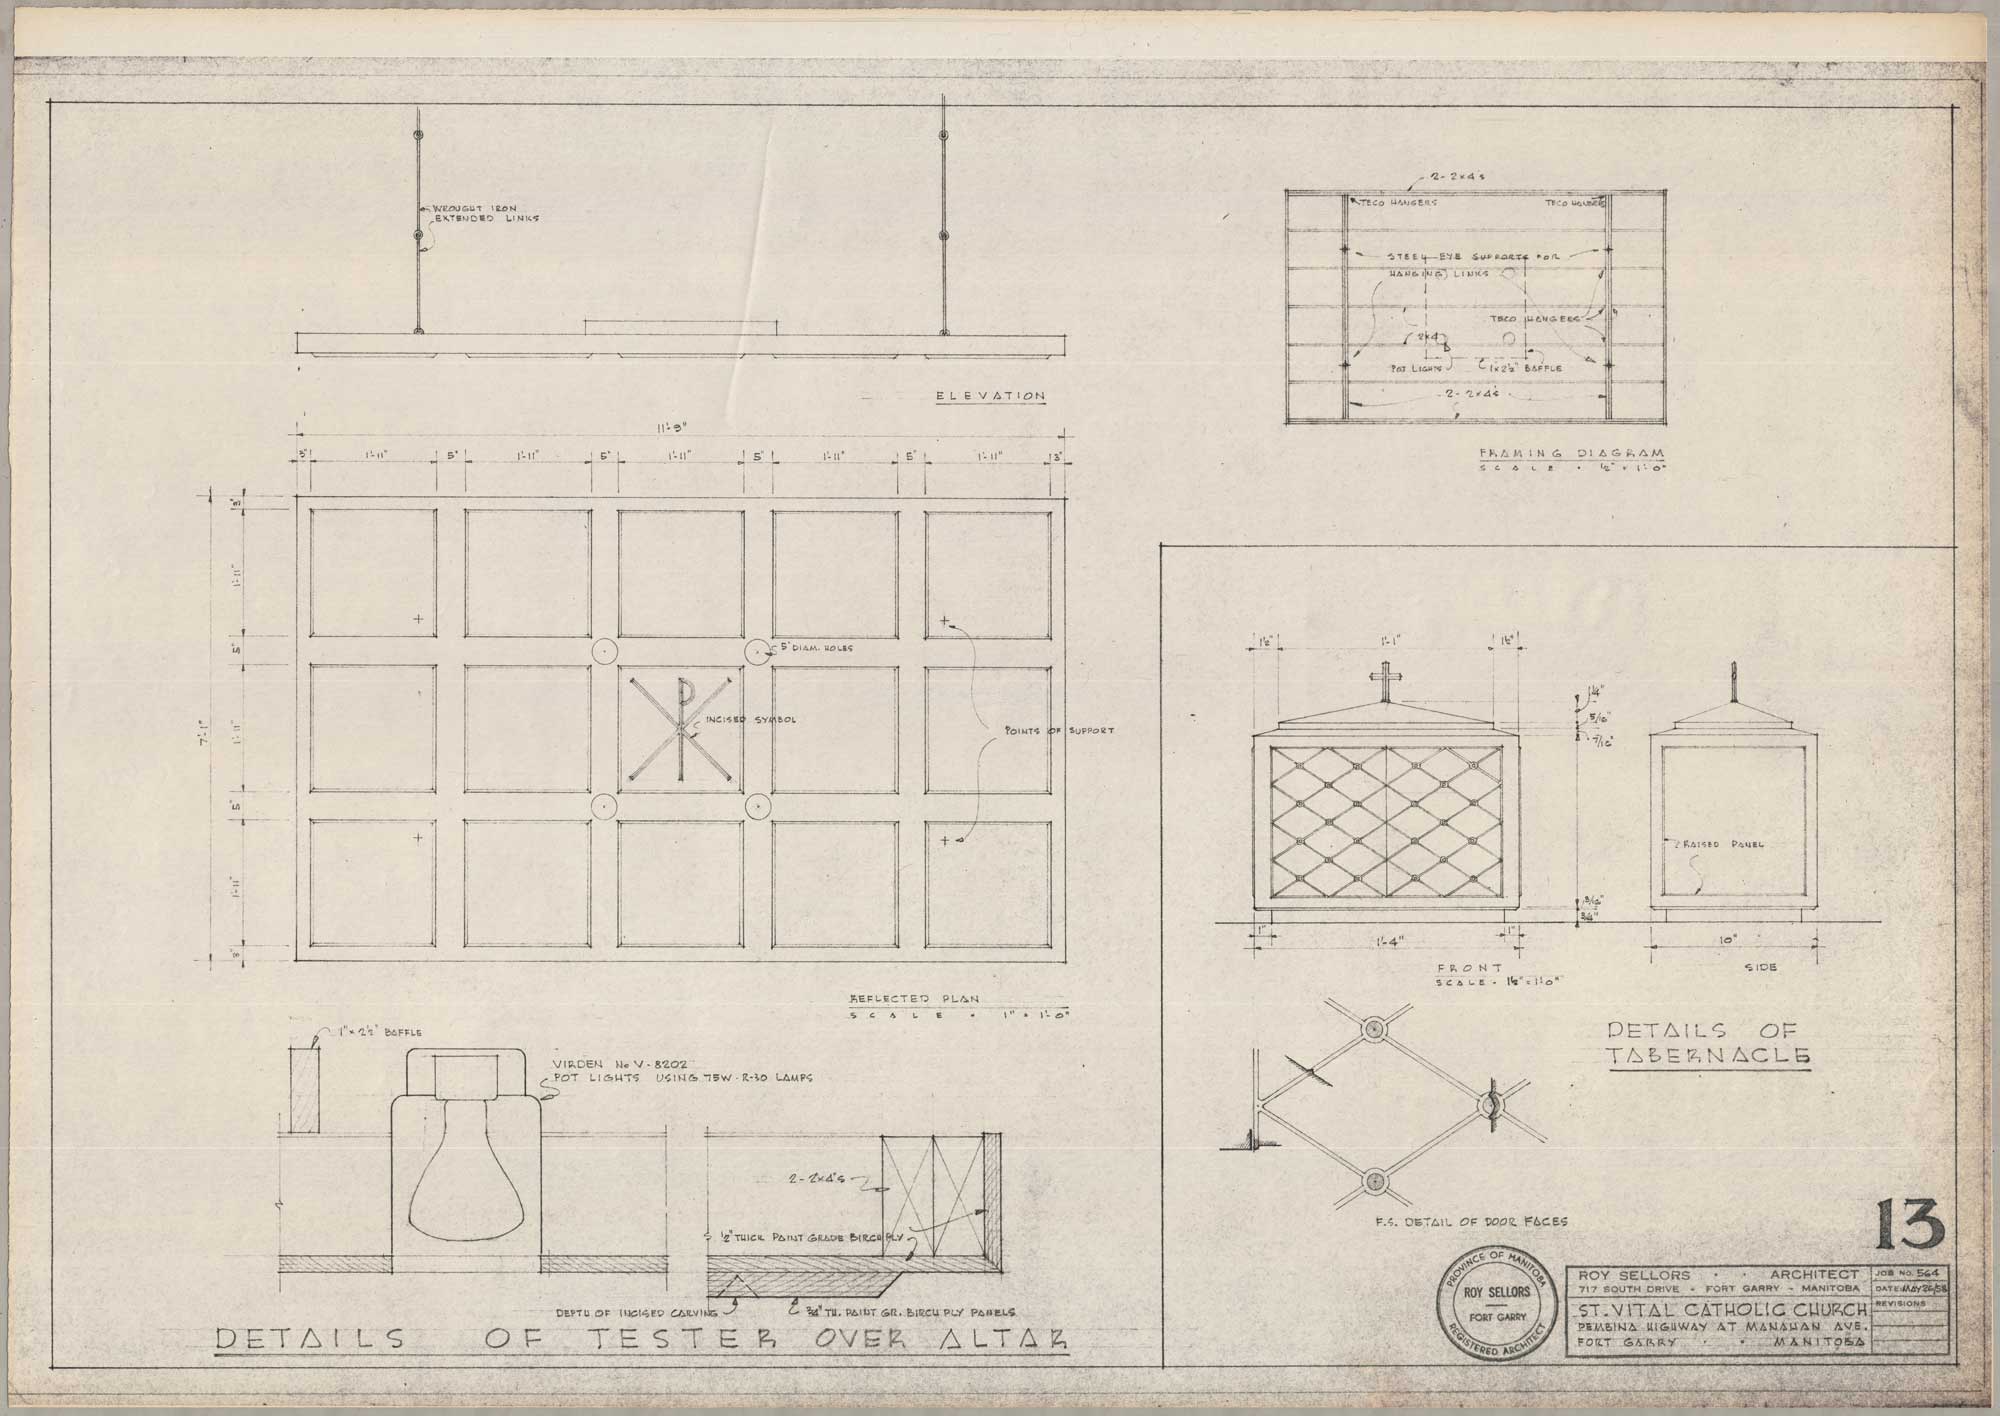 Image shows drawings of the tester over the altar and the details of the tabernacle for St. Vital Church. The sketches are simple, and show the front and sides of the altar and the tabernacle.